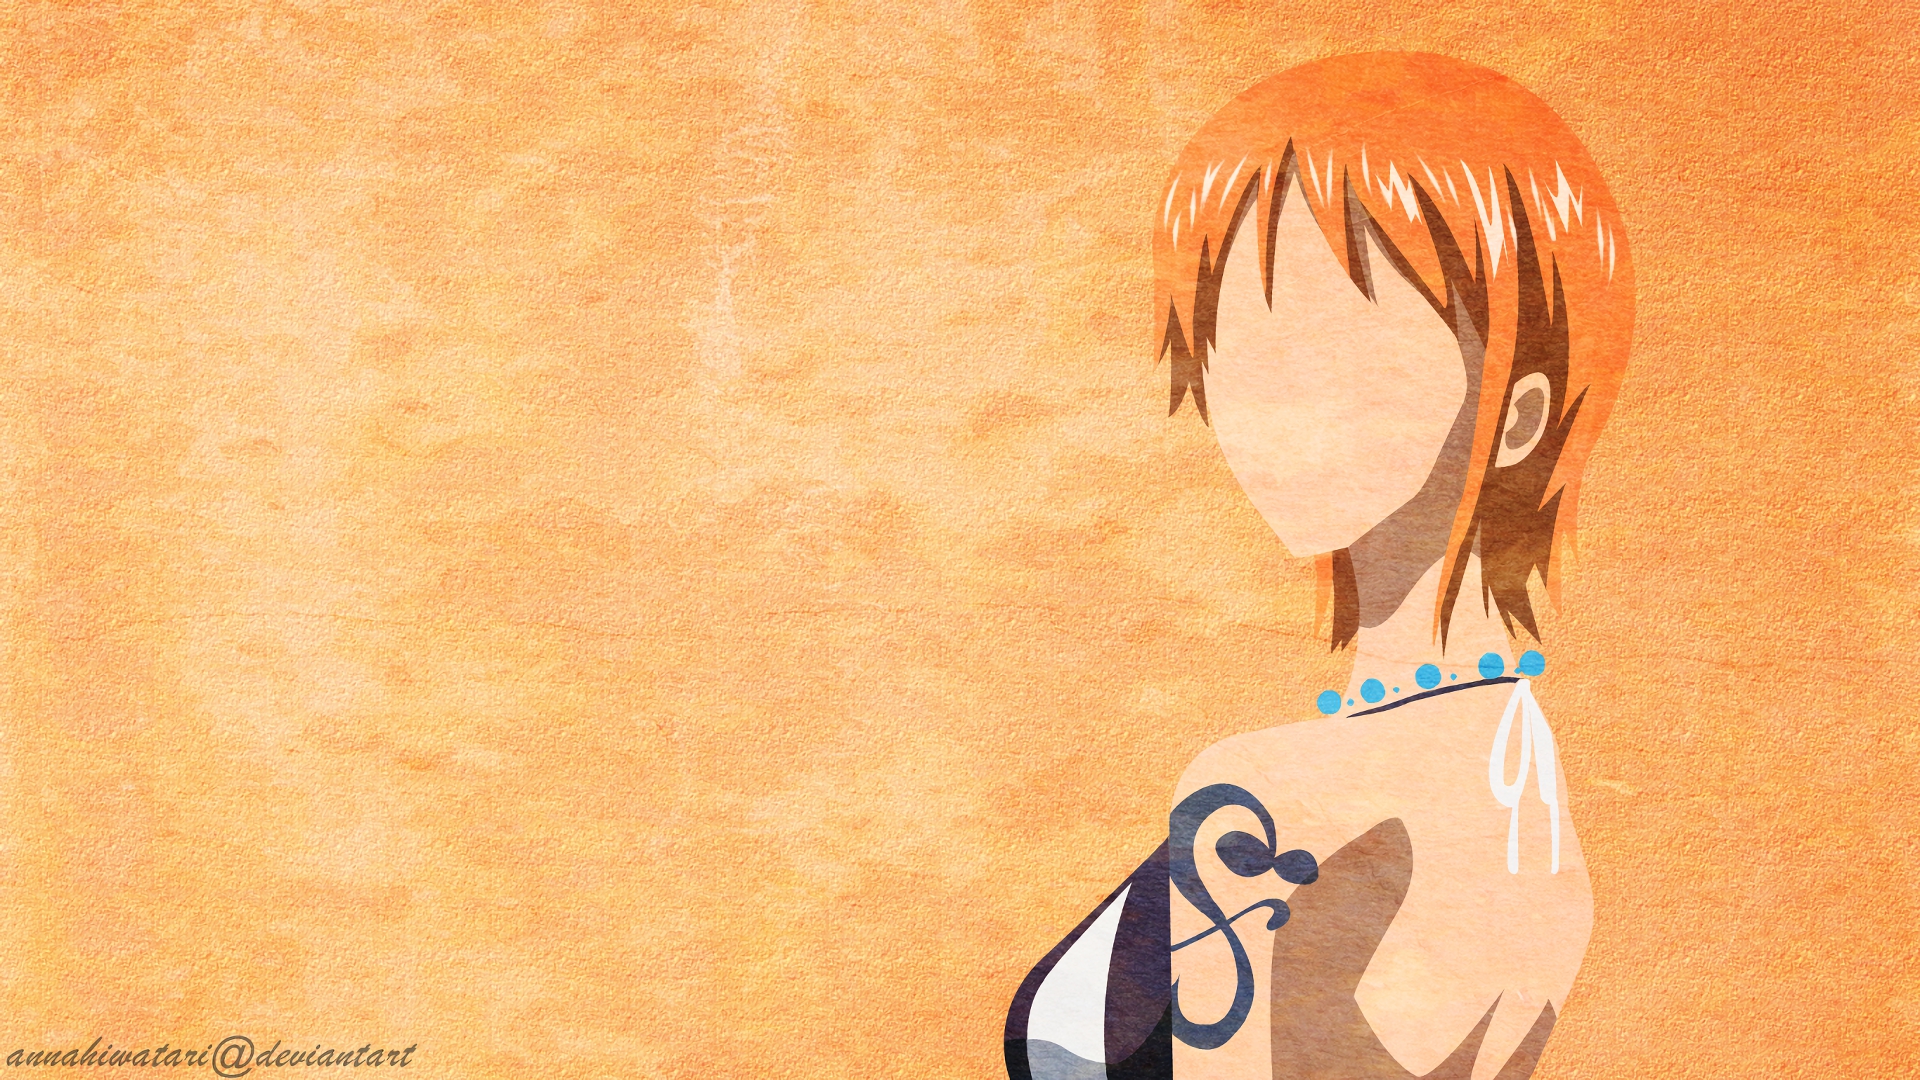 Wallpaper ID 1527328  hd Nami 1080P art x piece one one piece  anime free download